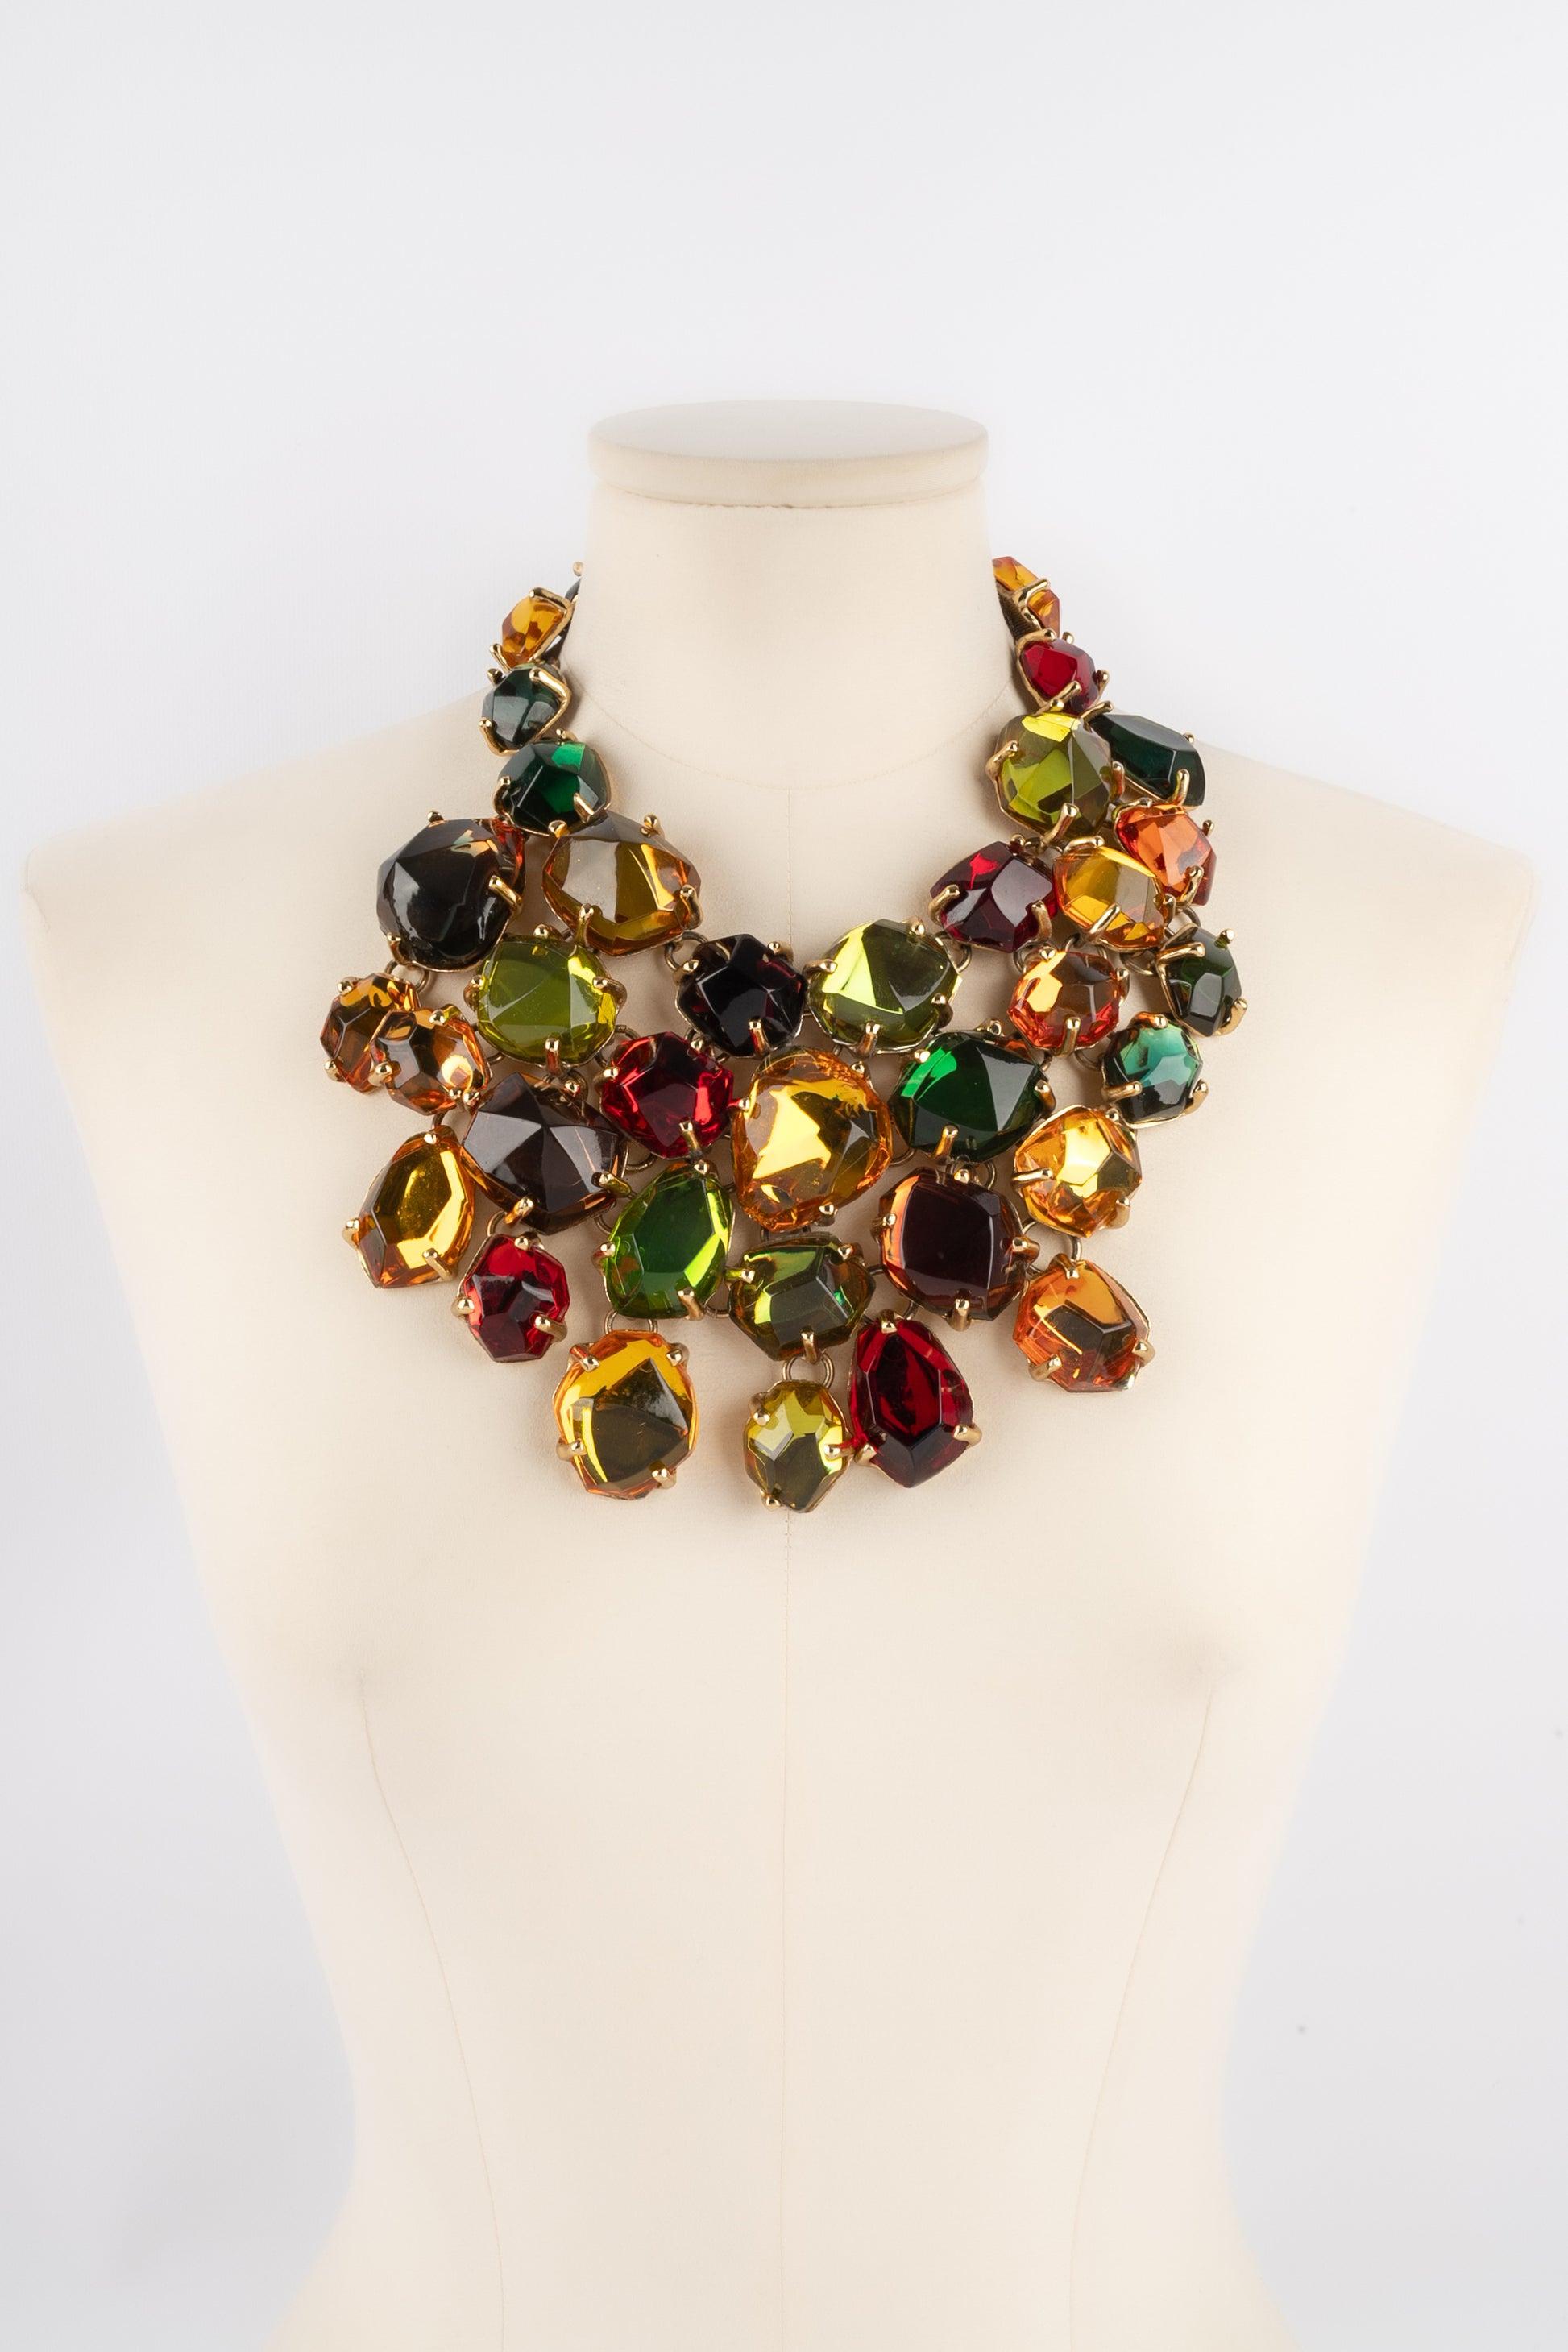 Yves Saint Laurent - (Made in France) Impressive golden metal dickey necklace with colorful resin cabochons. To be mentioned, the metal formed a patina on the back.

Additional information:
Condition: Good condition
Dimensions: Length: from 41 cm to